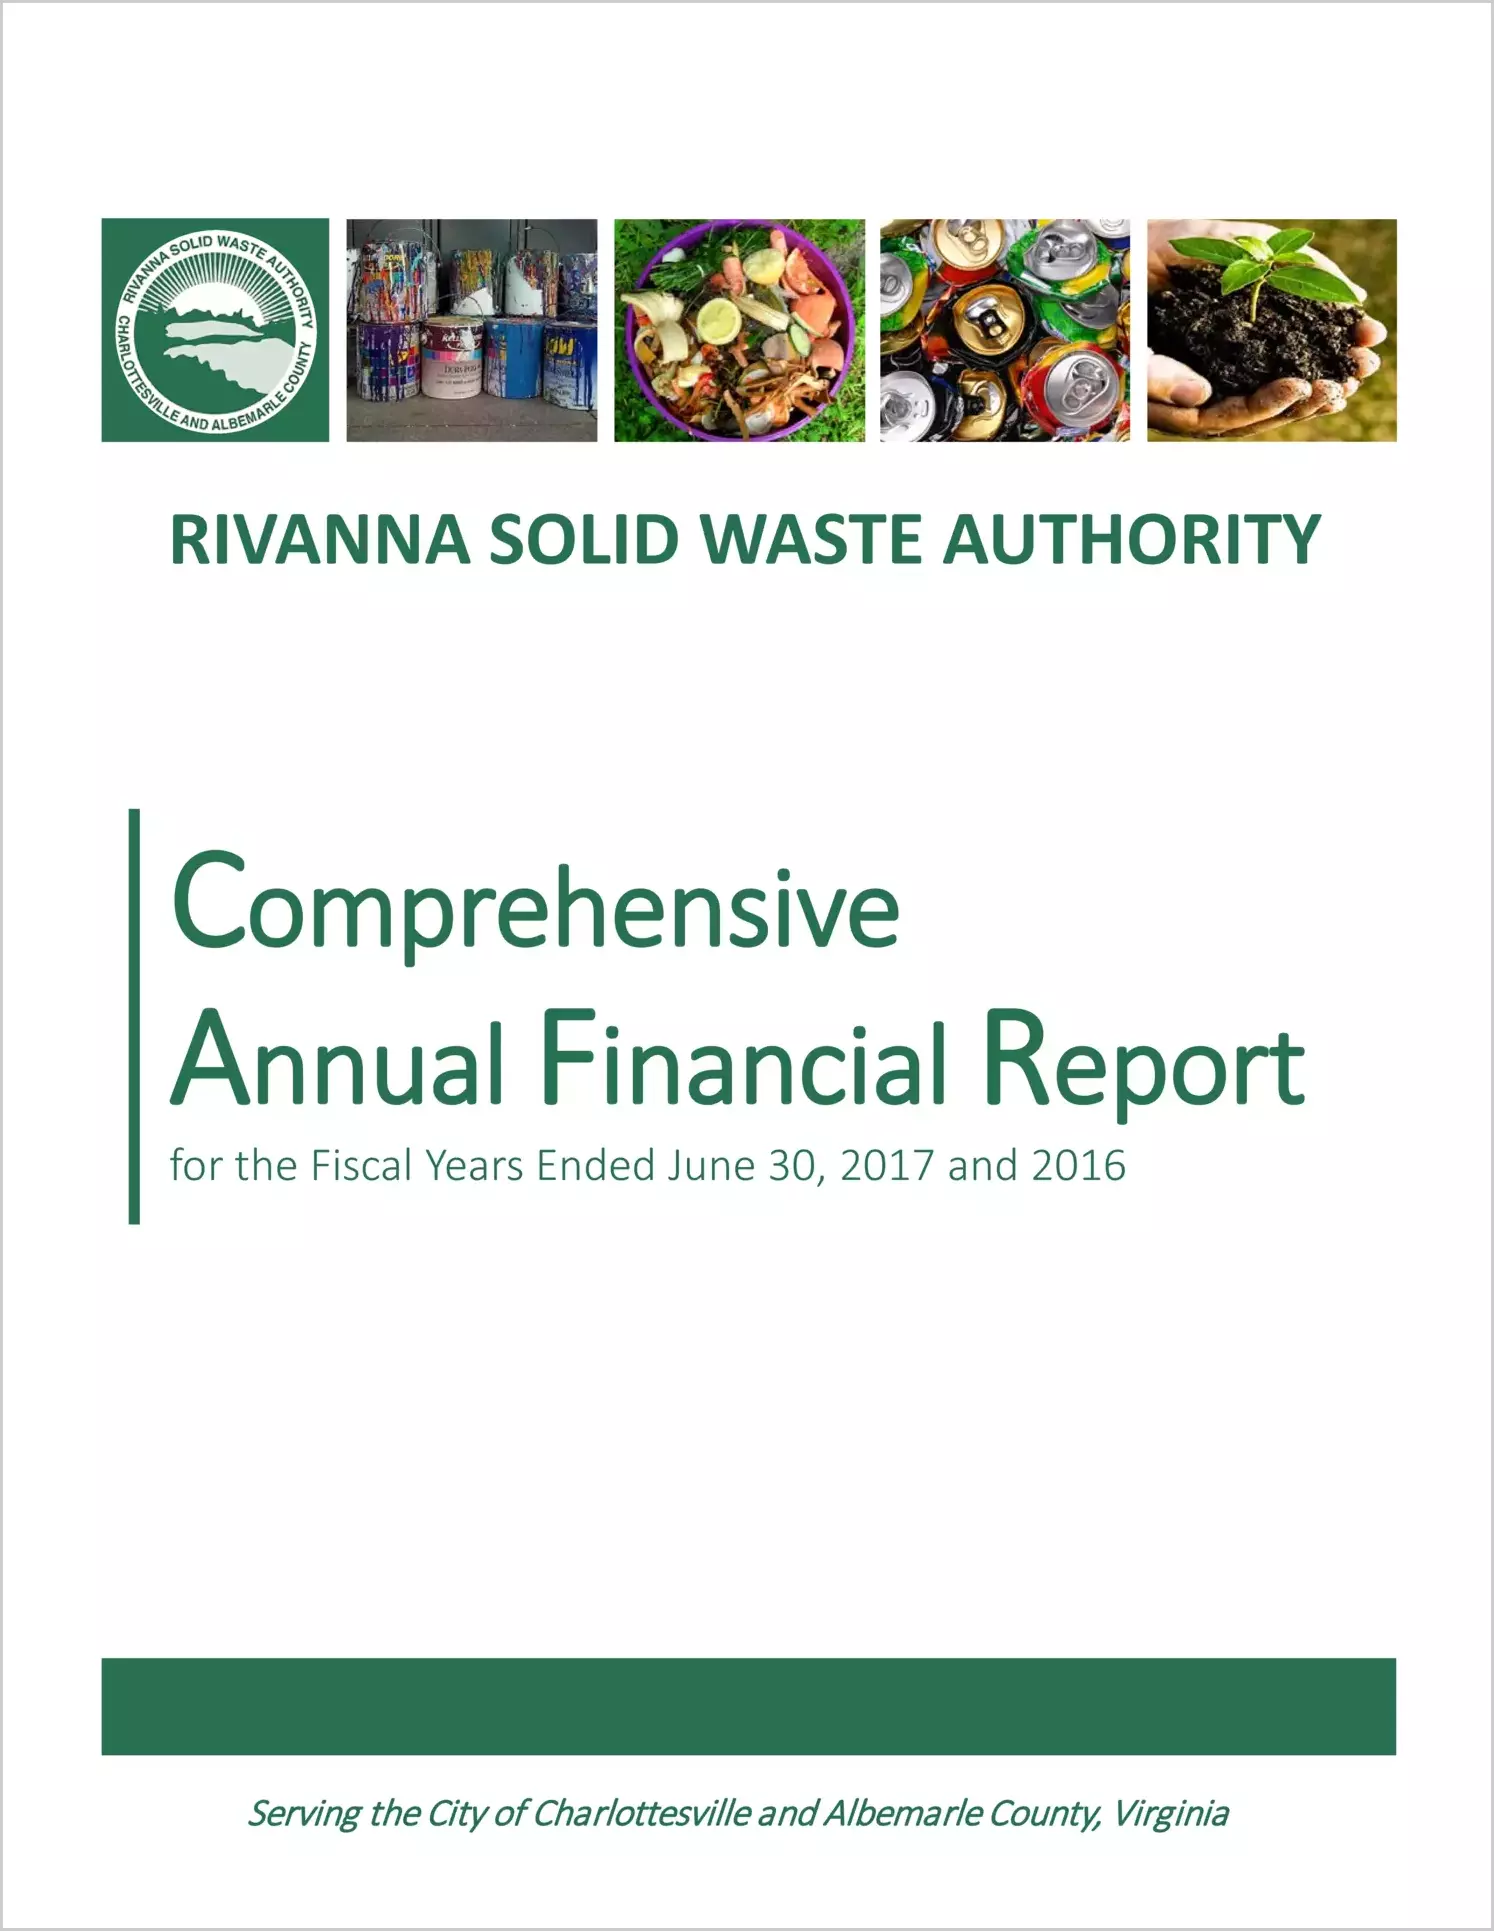 2017 ABC/Other Annual Financial Report  for Rivanna Solid Waste Authority